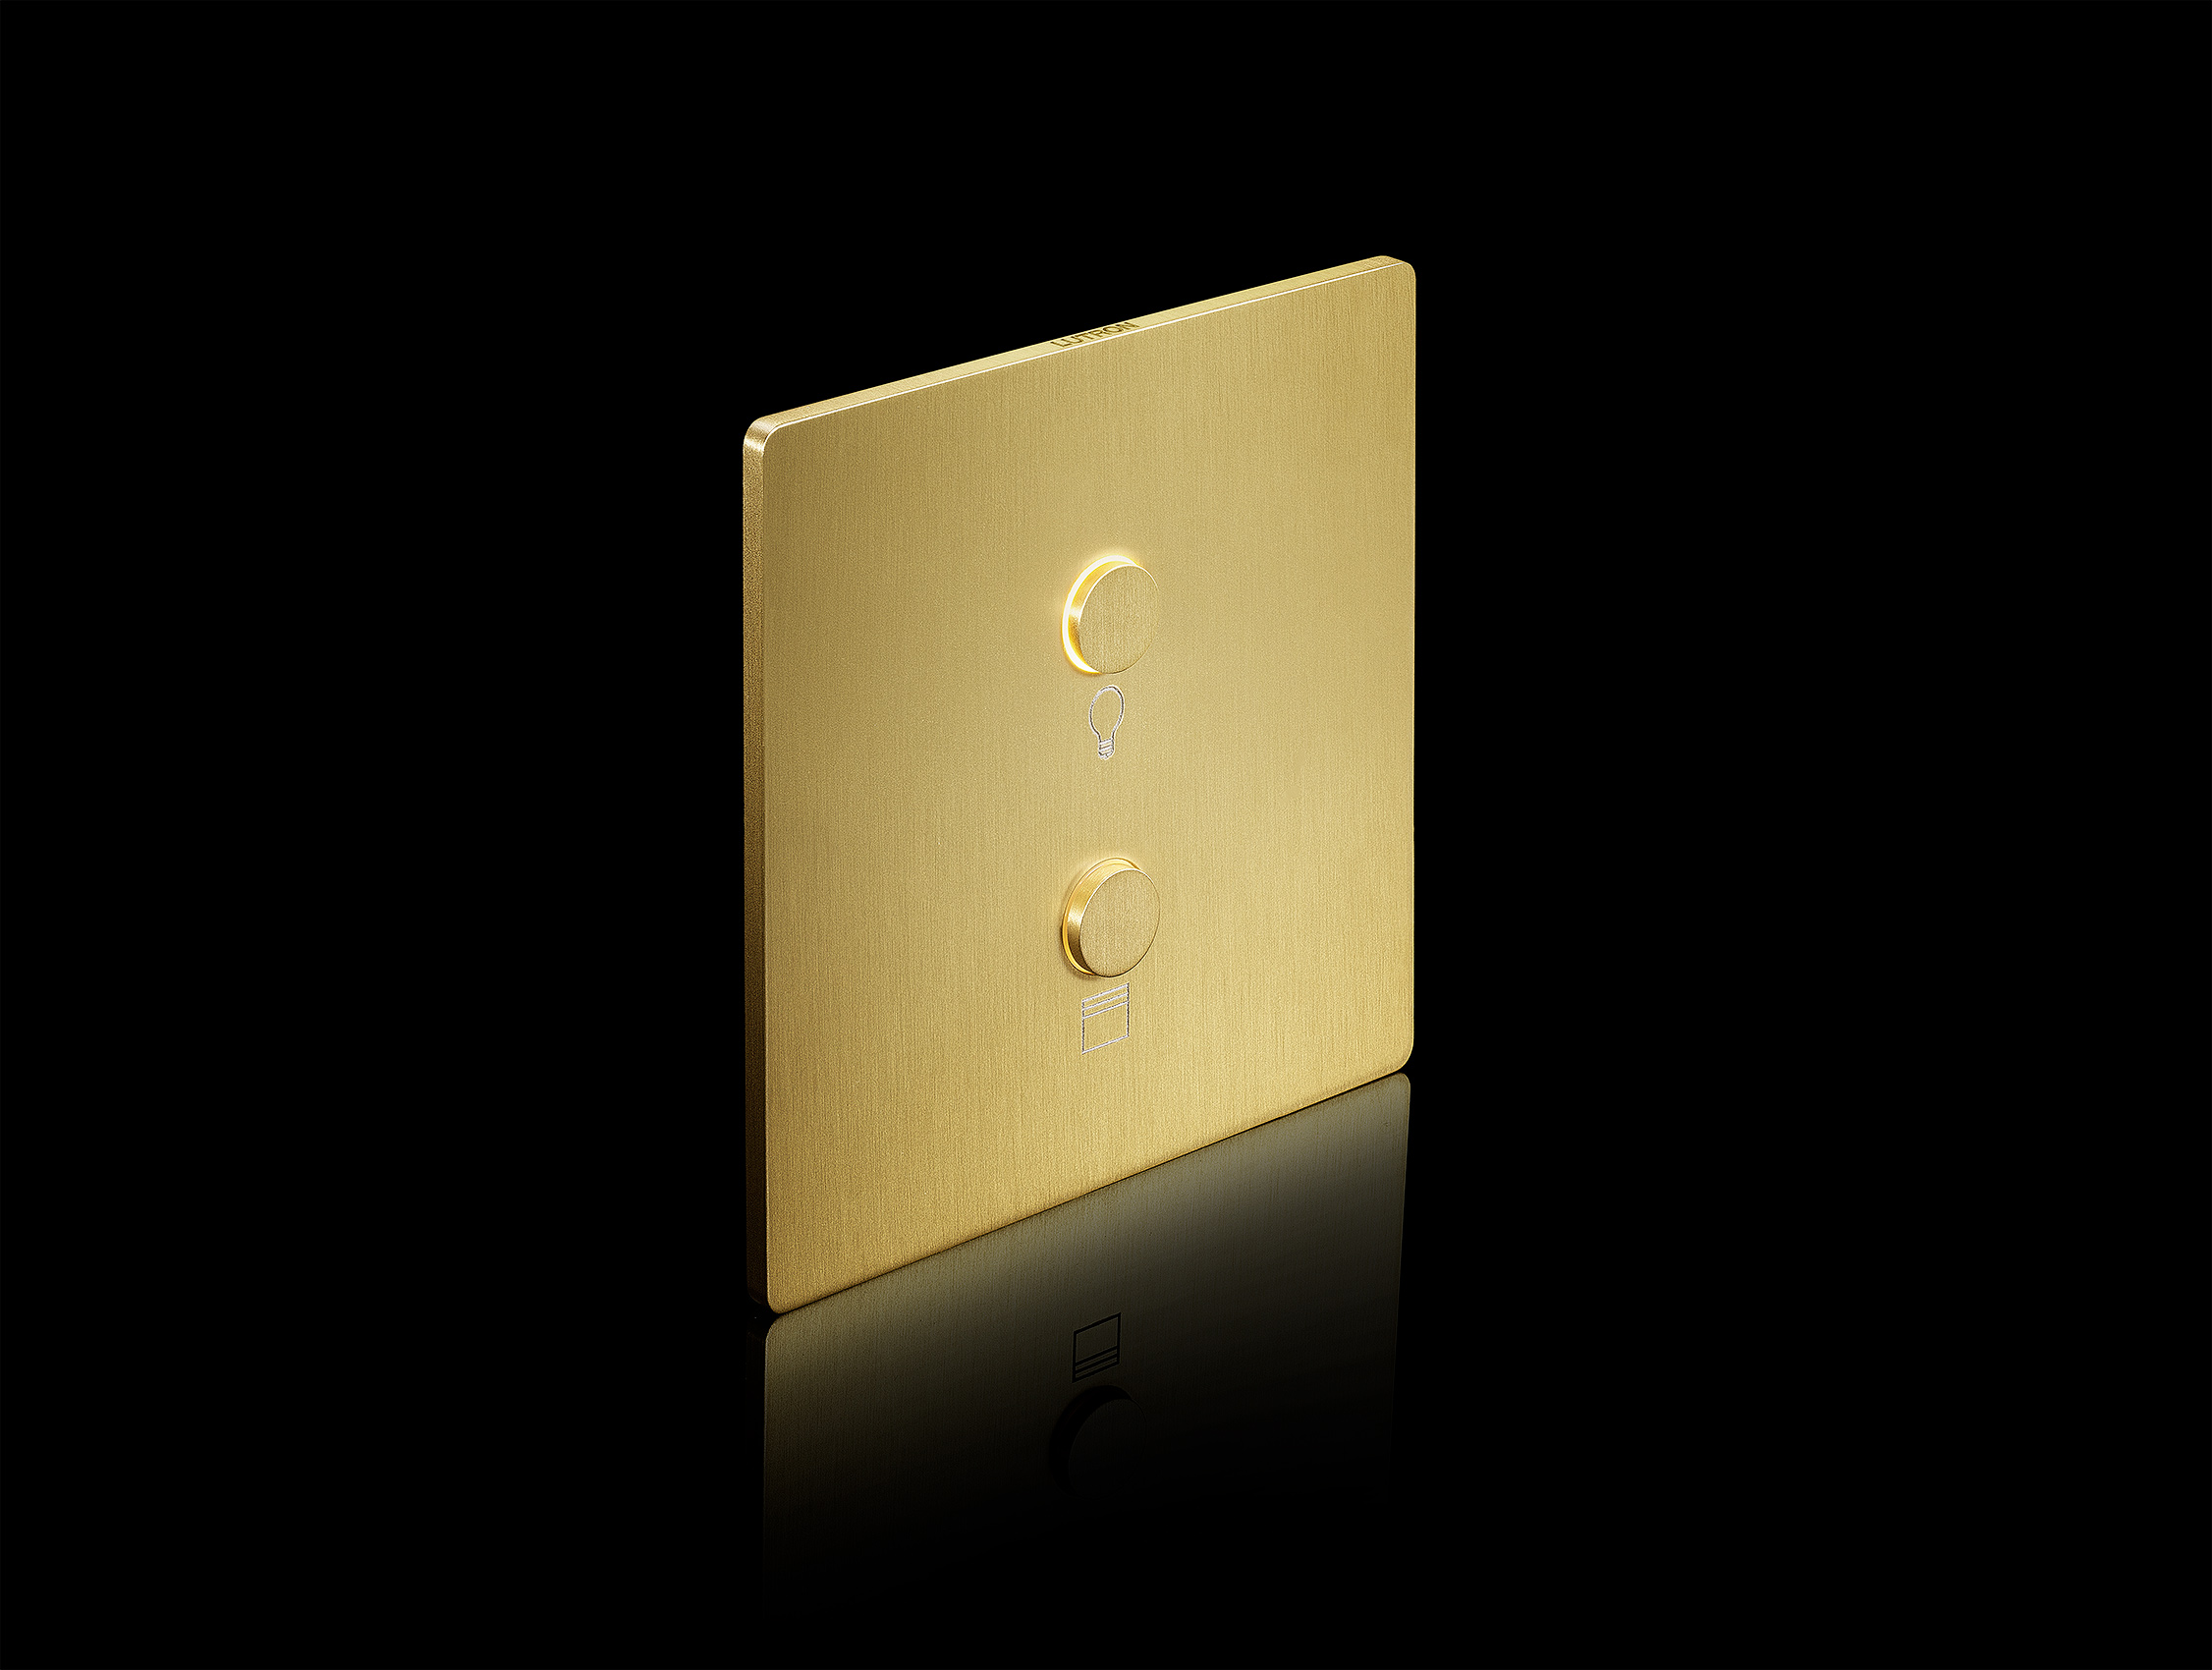 Brushed Metal Gold Light Switch Plate